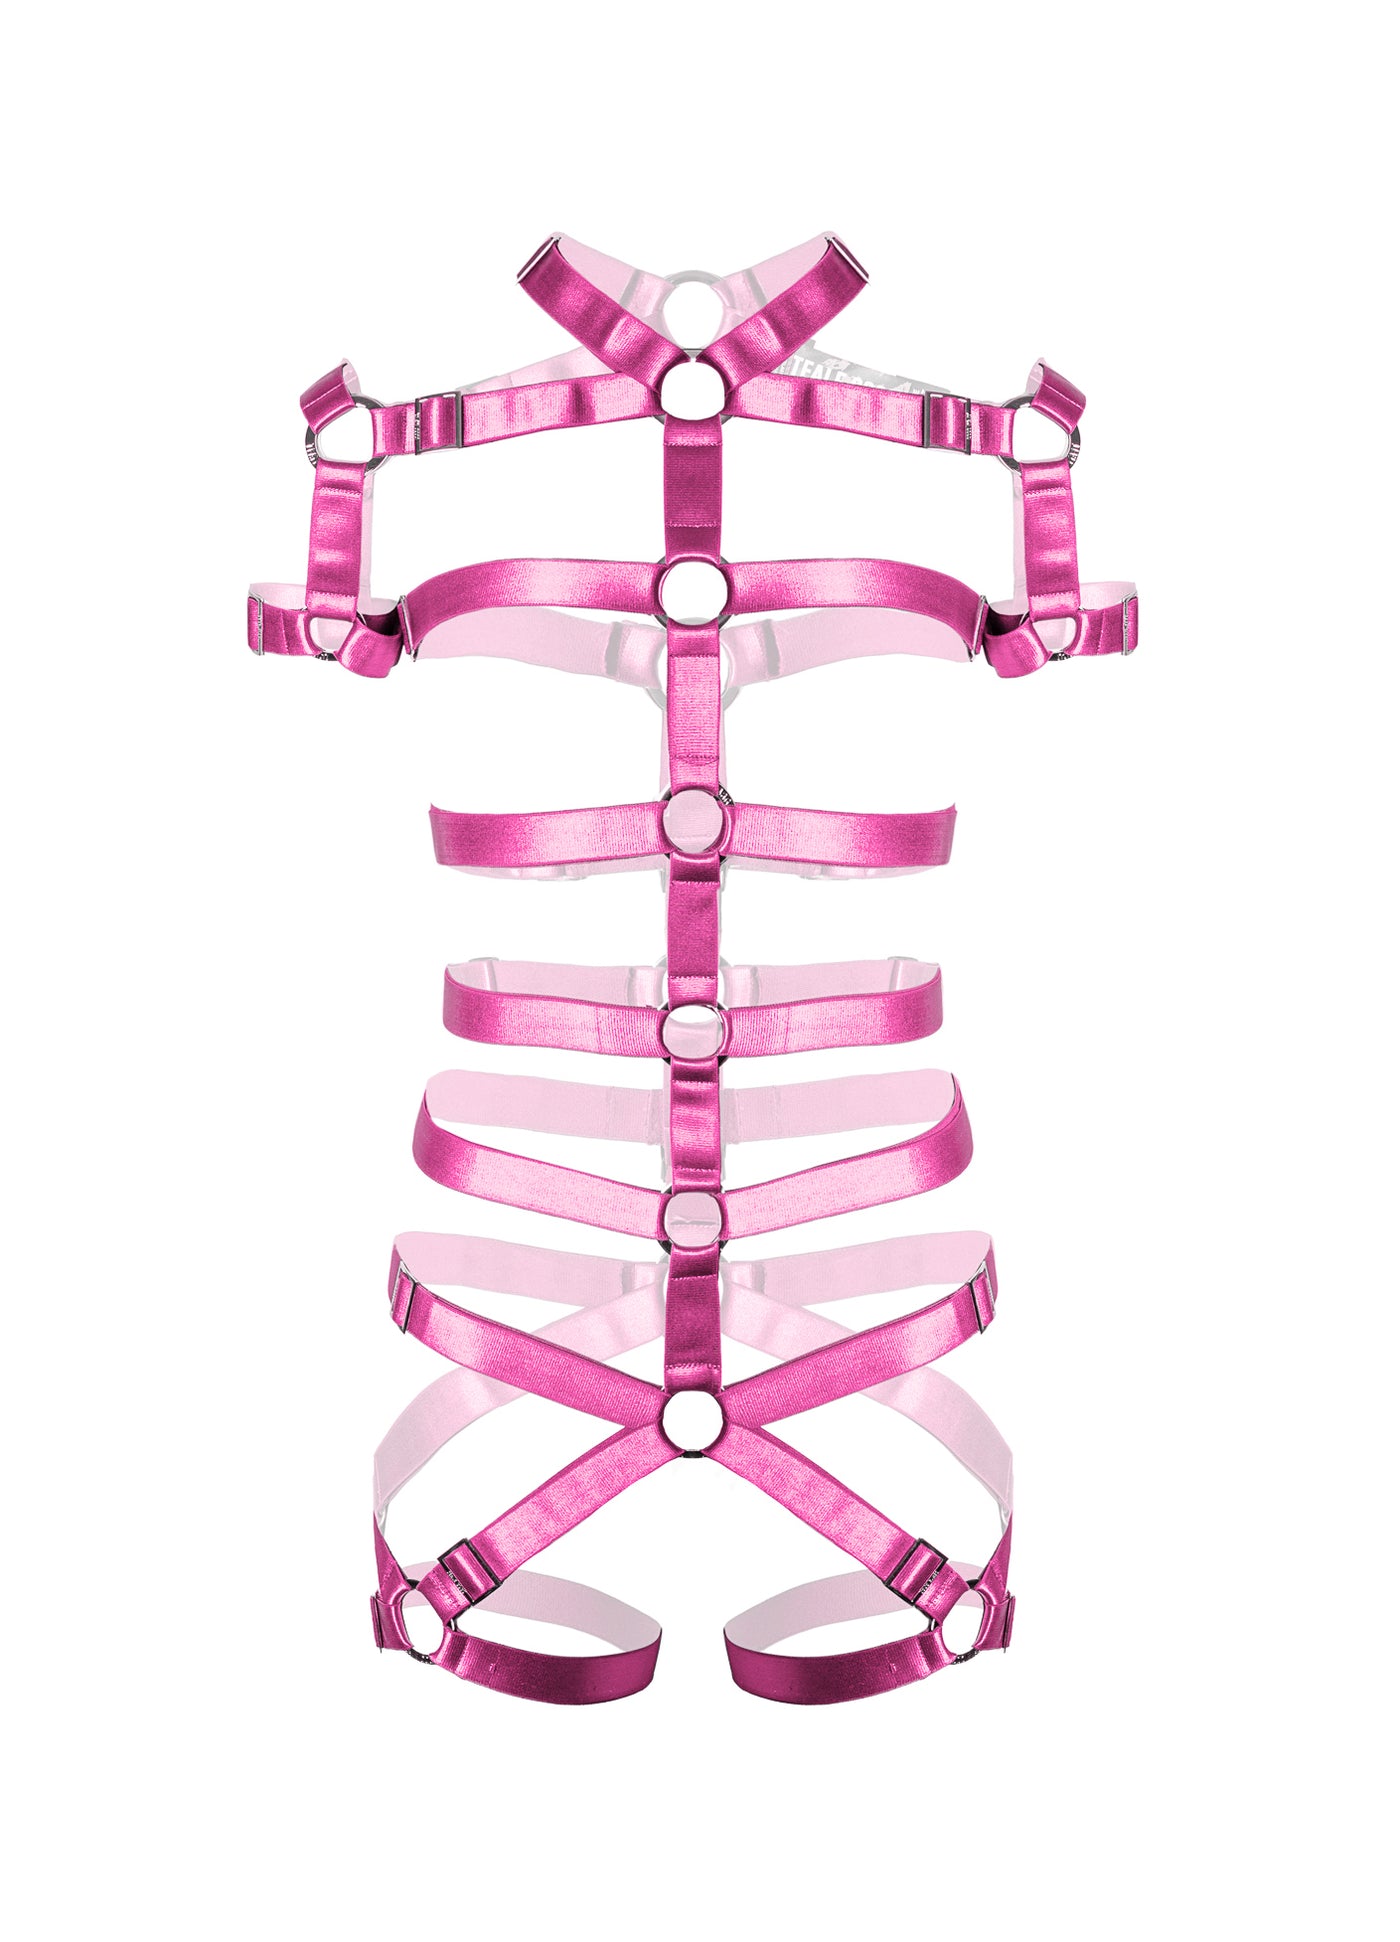 Tomb Full Body Harness - Candy Pink